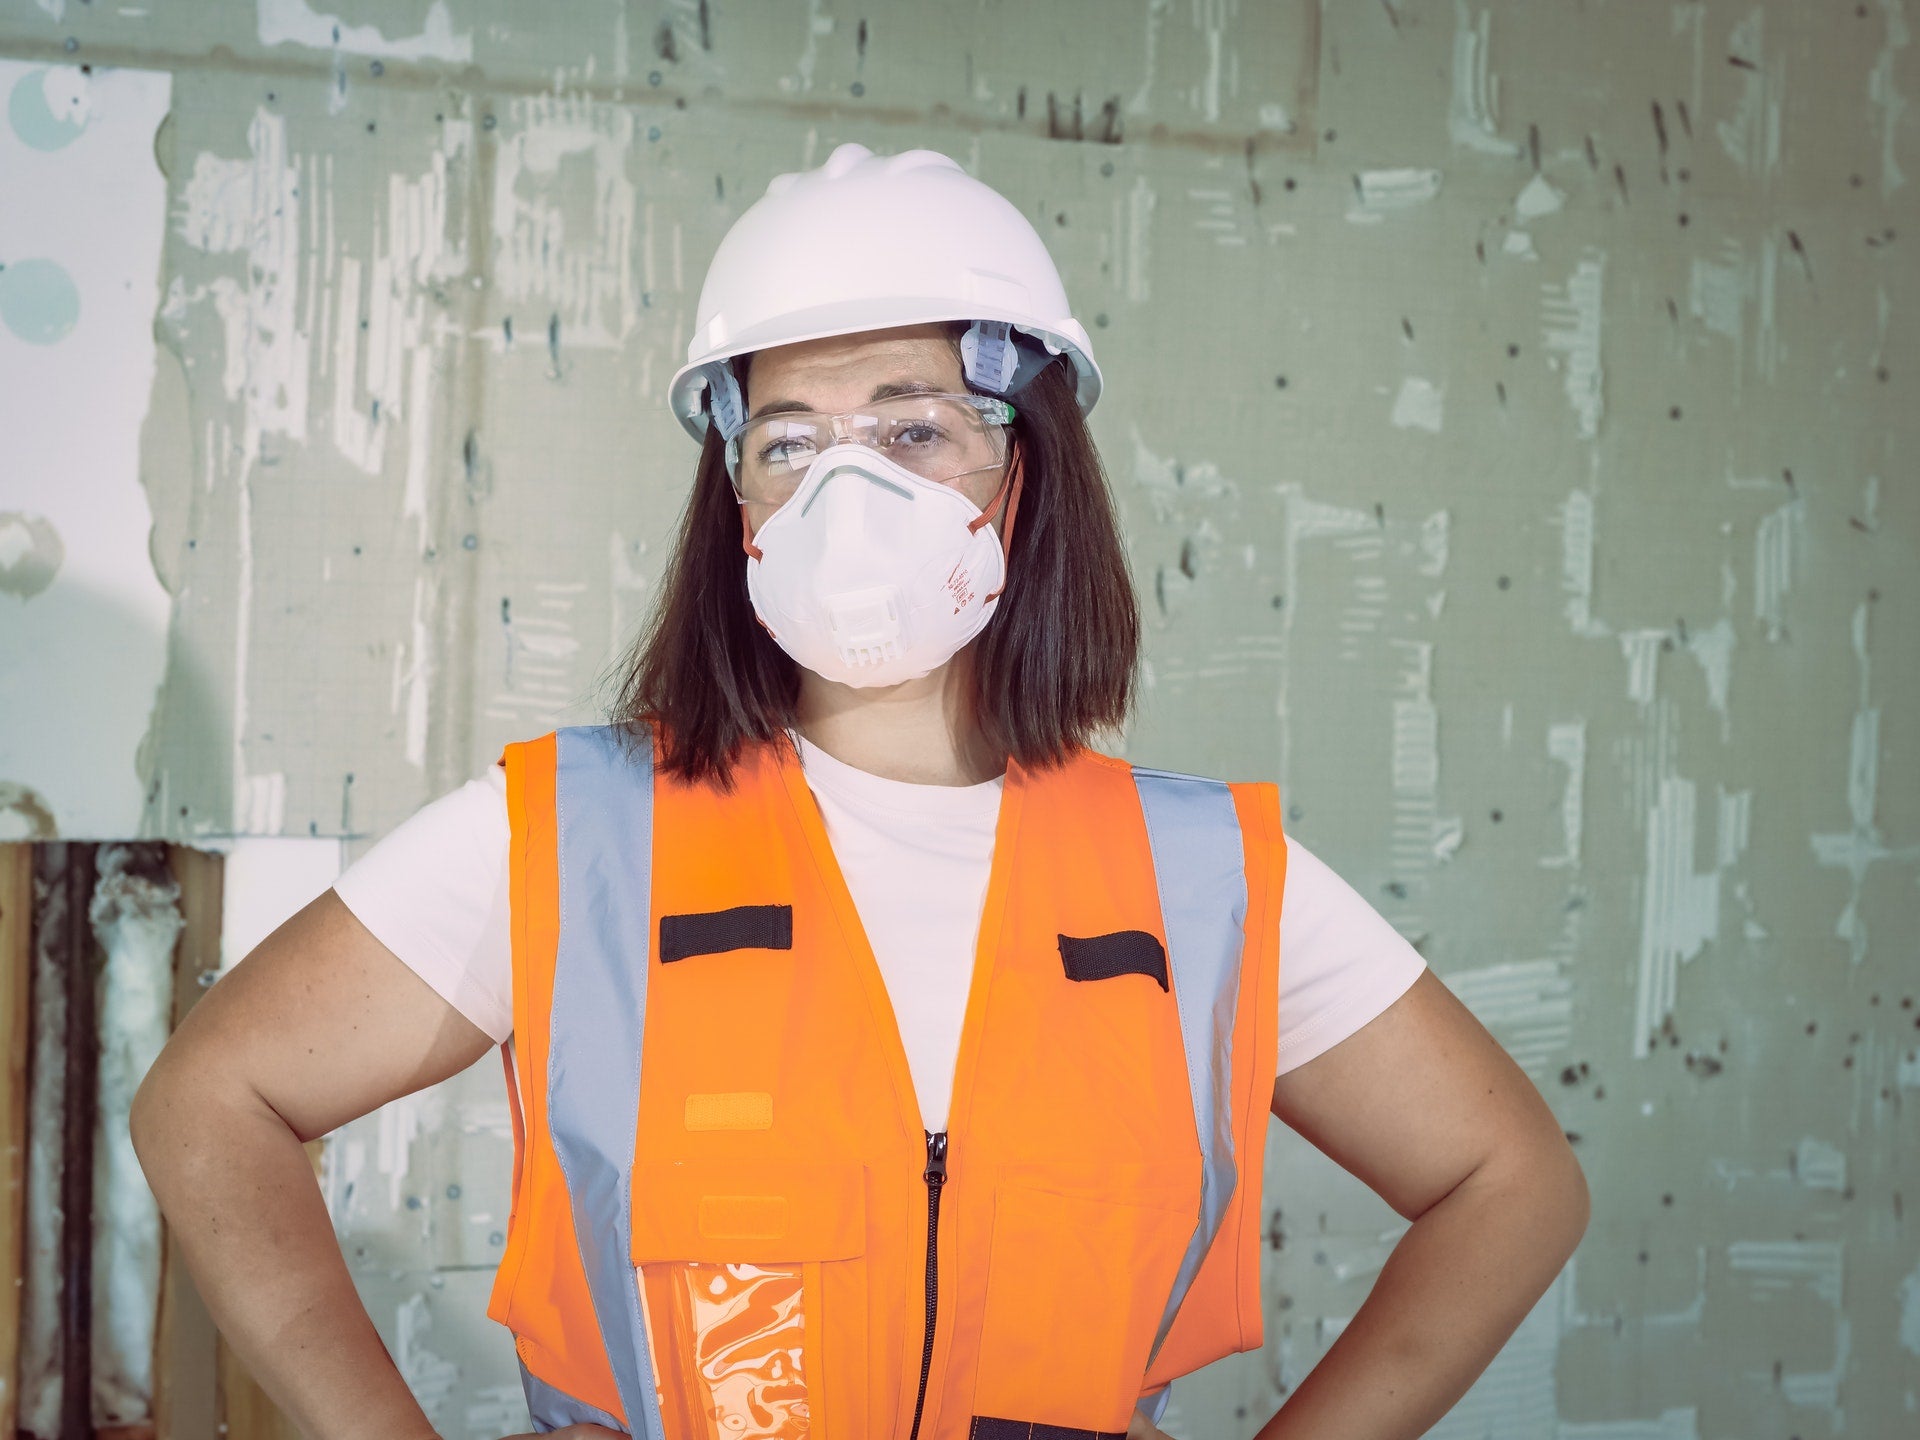 With £10bn in PPE thrown away, what should you look for?